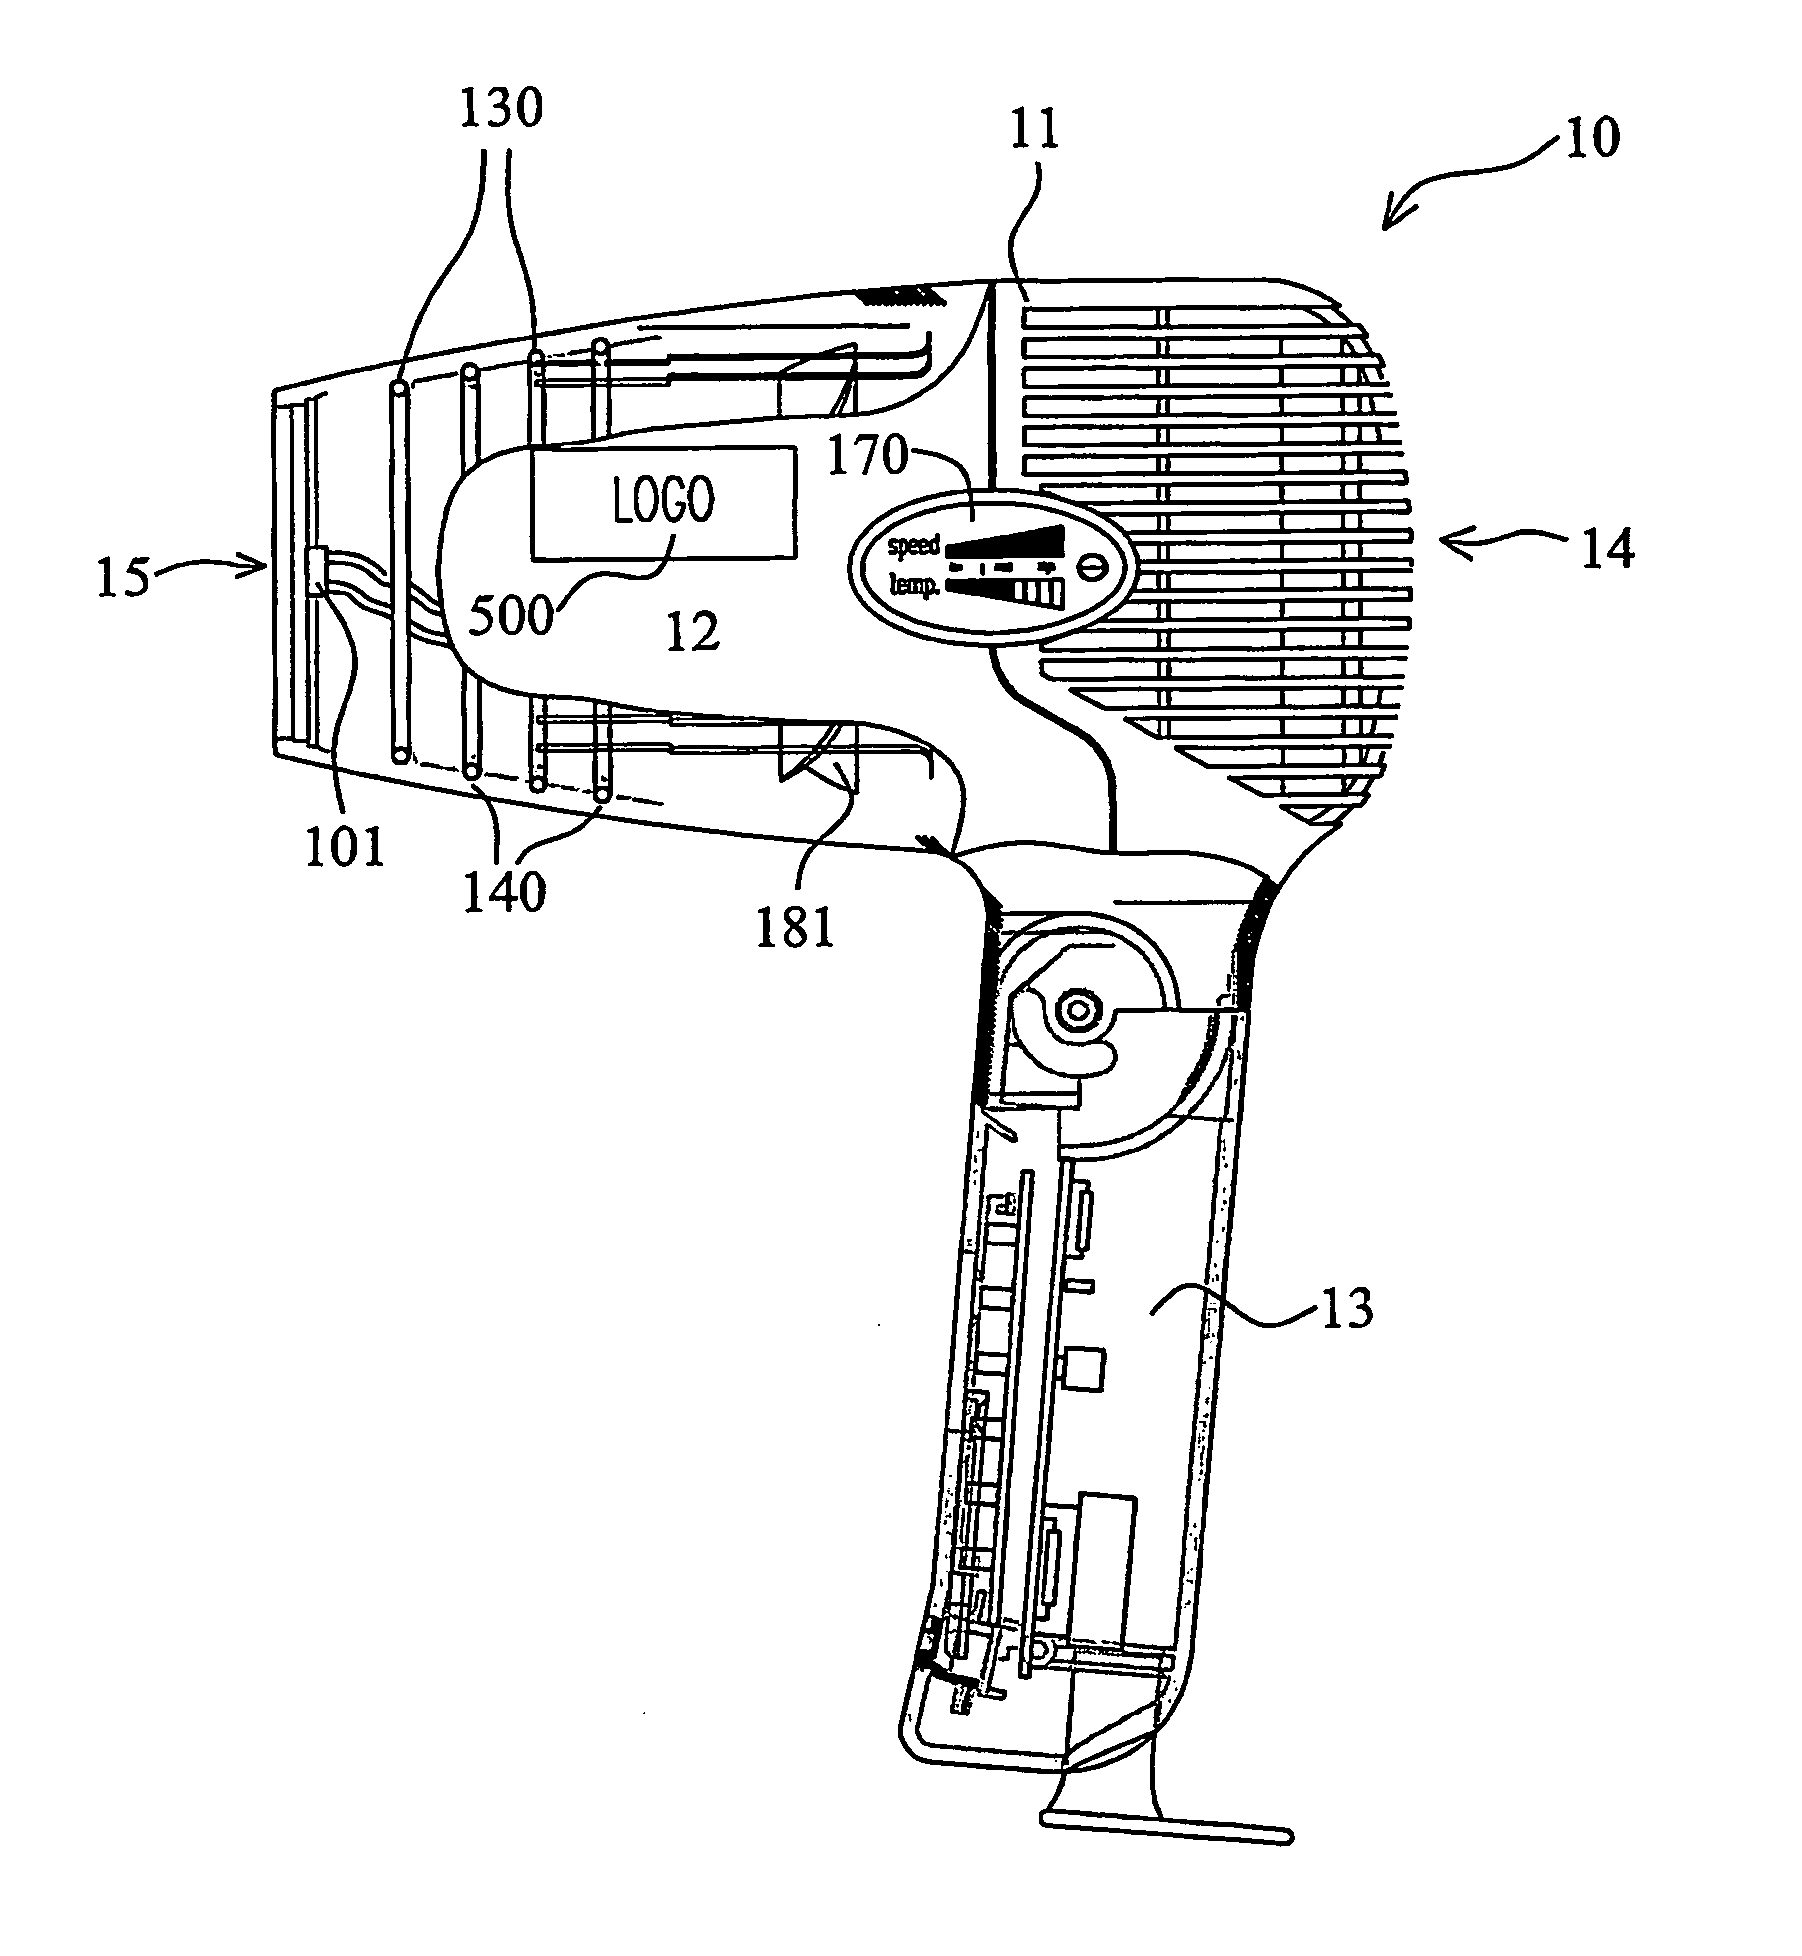 Personal care device with thermal feedback and operating conditions display